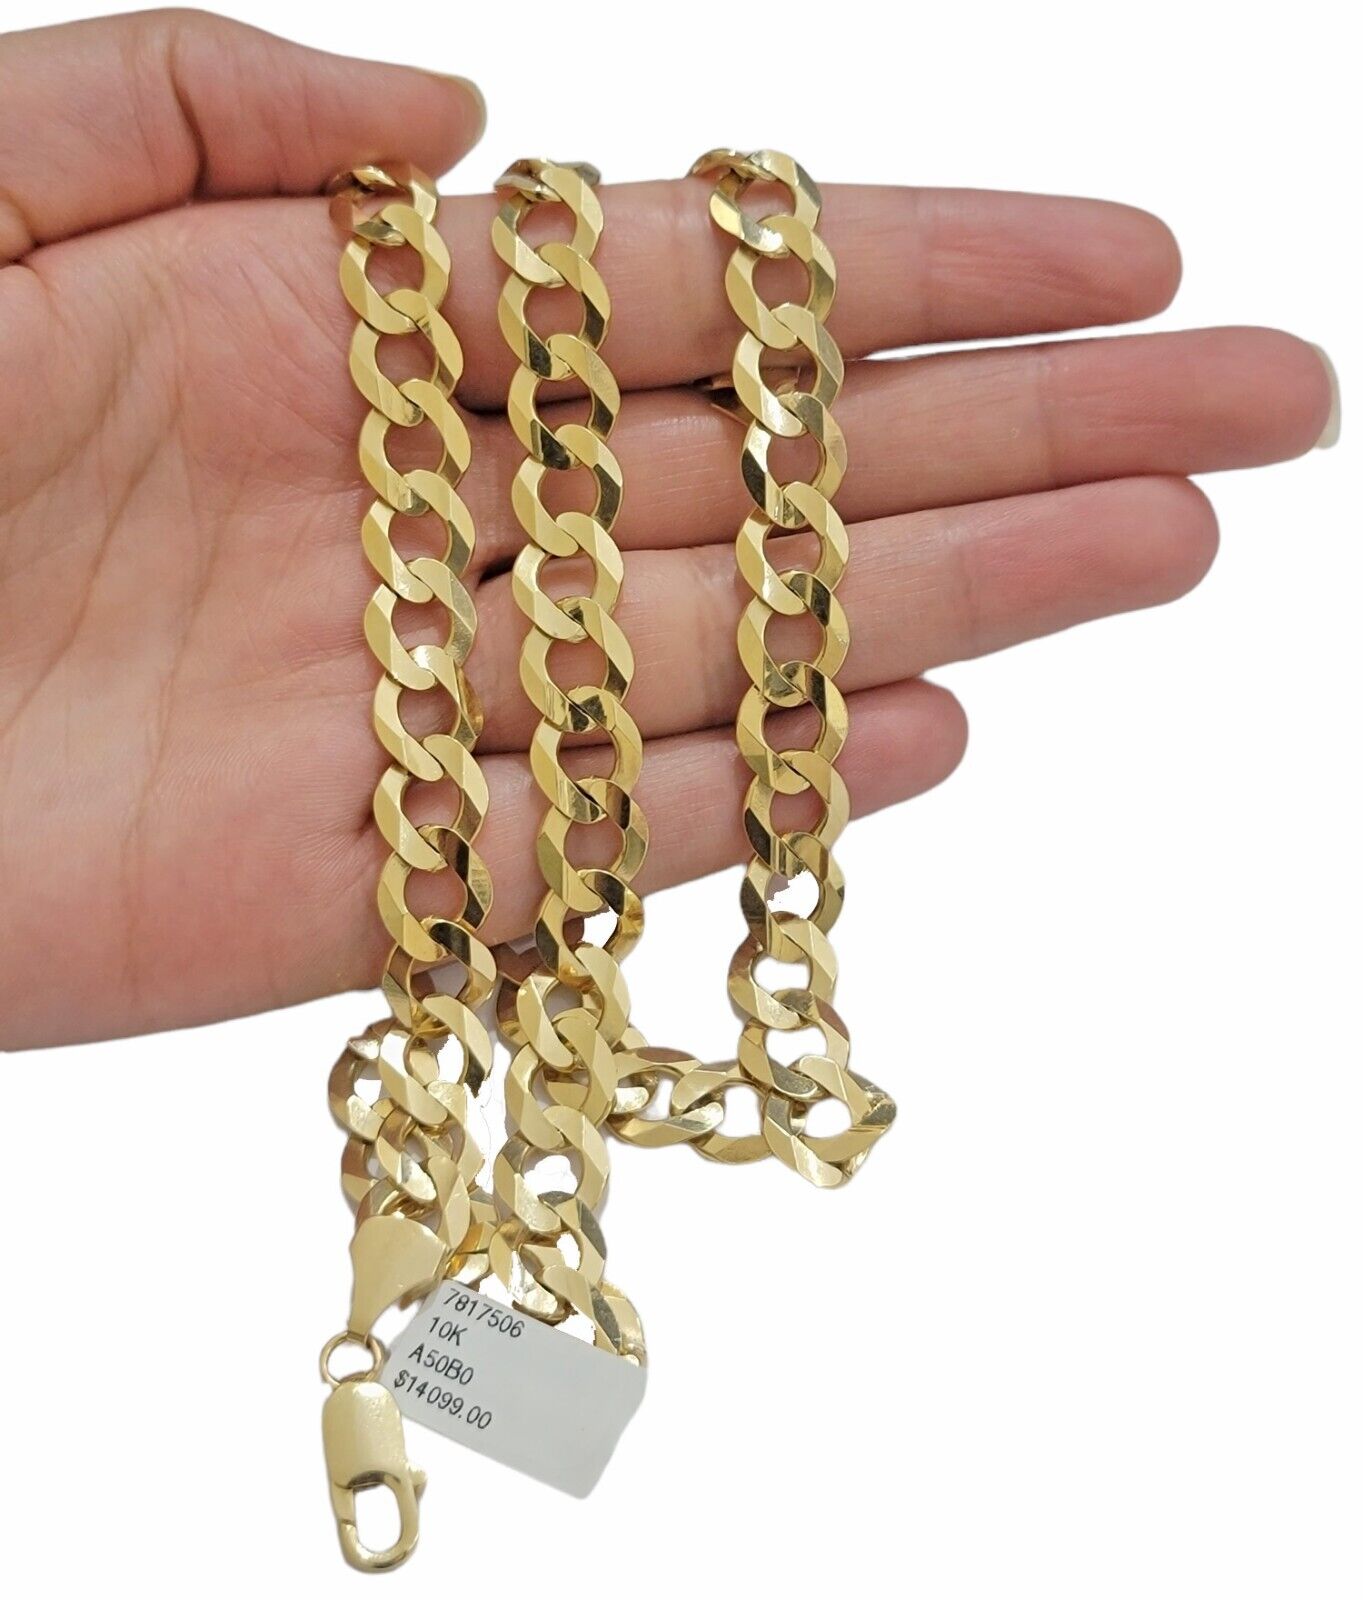 10mm 10k Yellow Gold Cuban Curb Link Chain Necklace 24 Inch Mens REAL 10KT SOLID